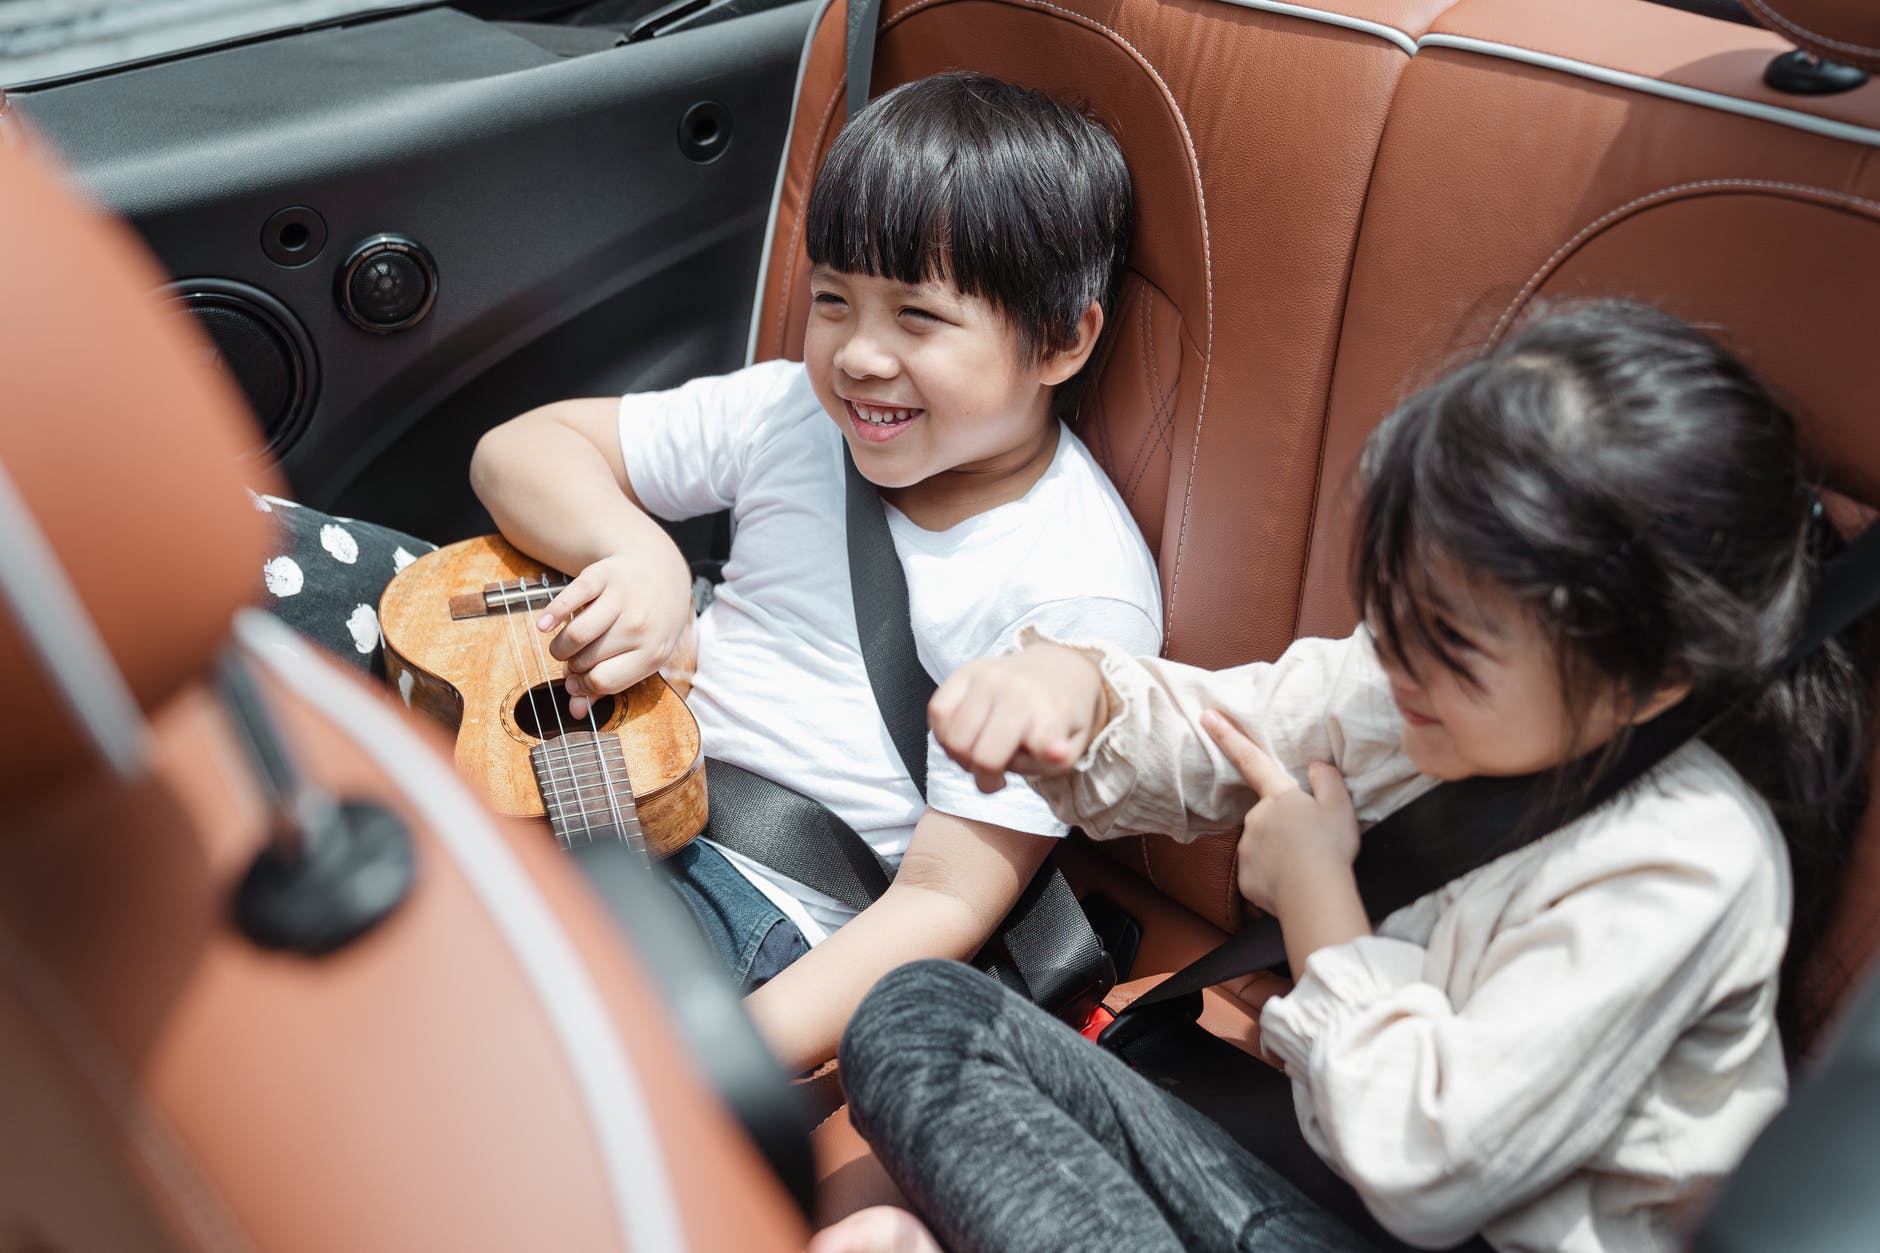 happy kids traveling in car - tips for road trips with family or friends